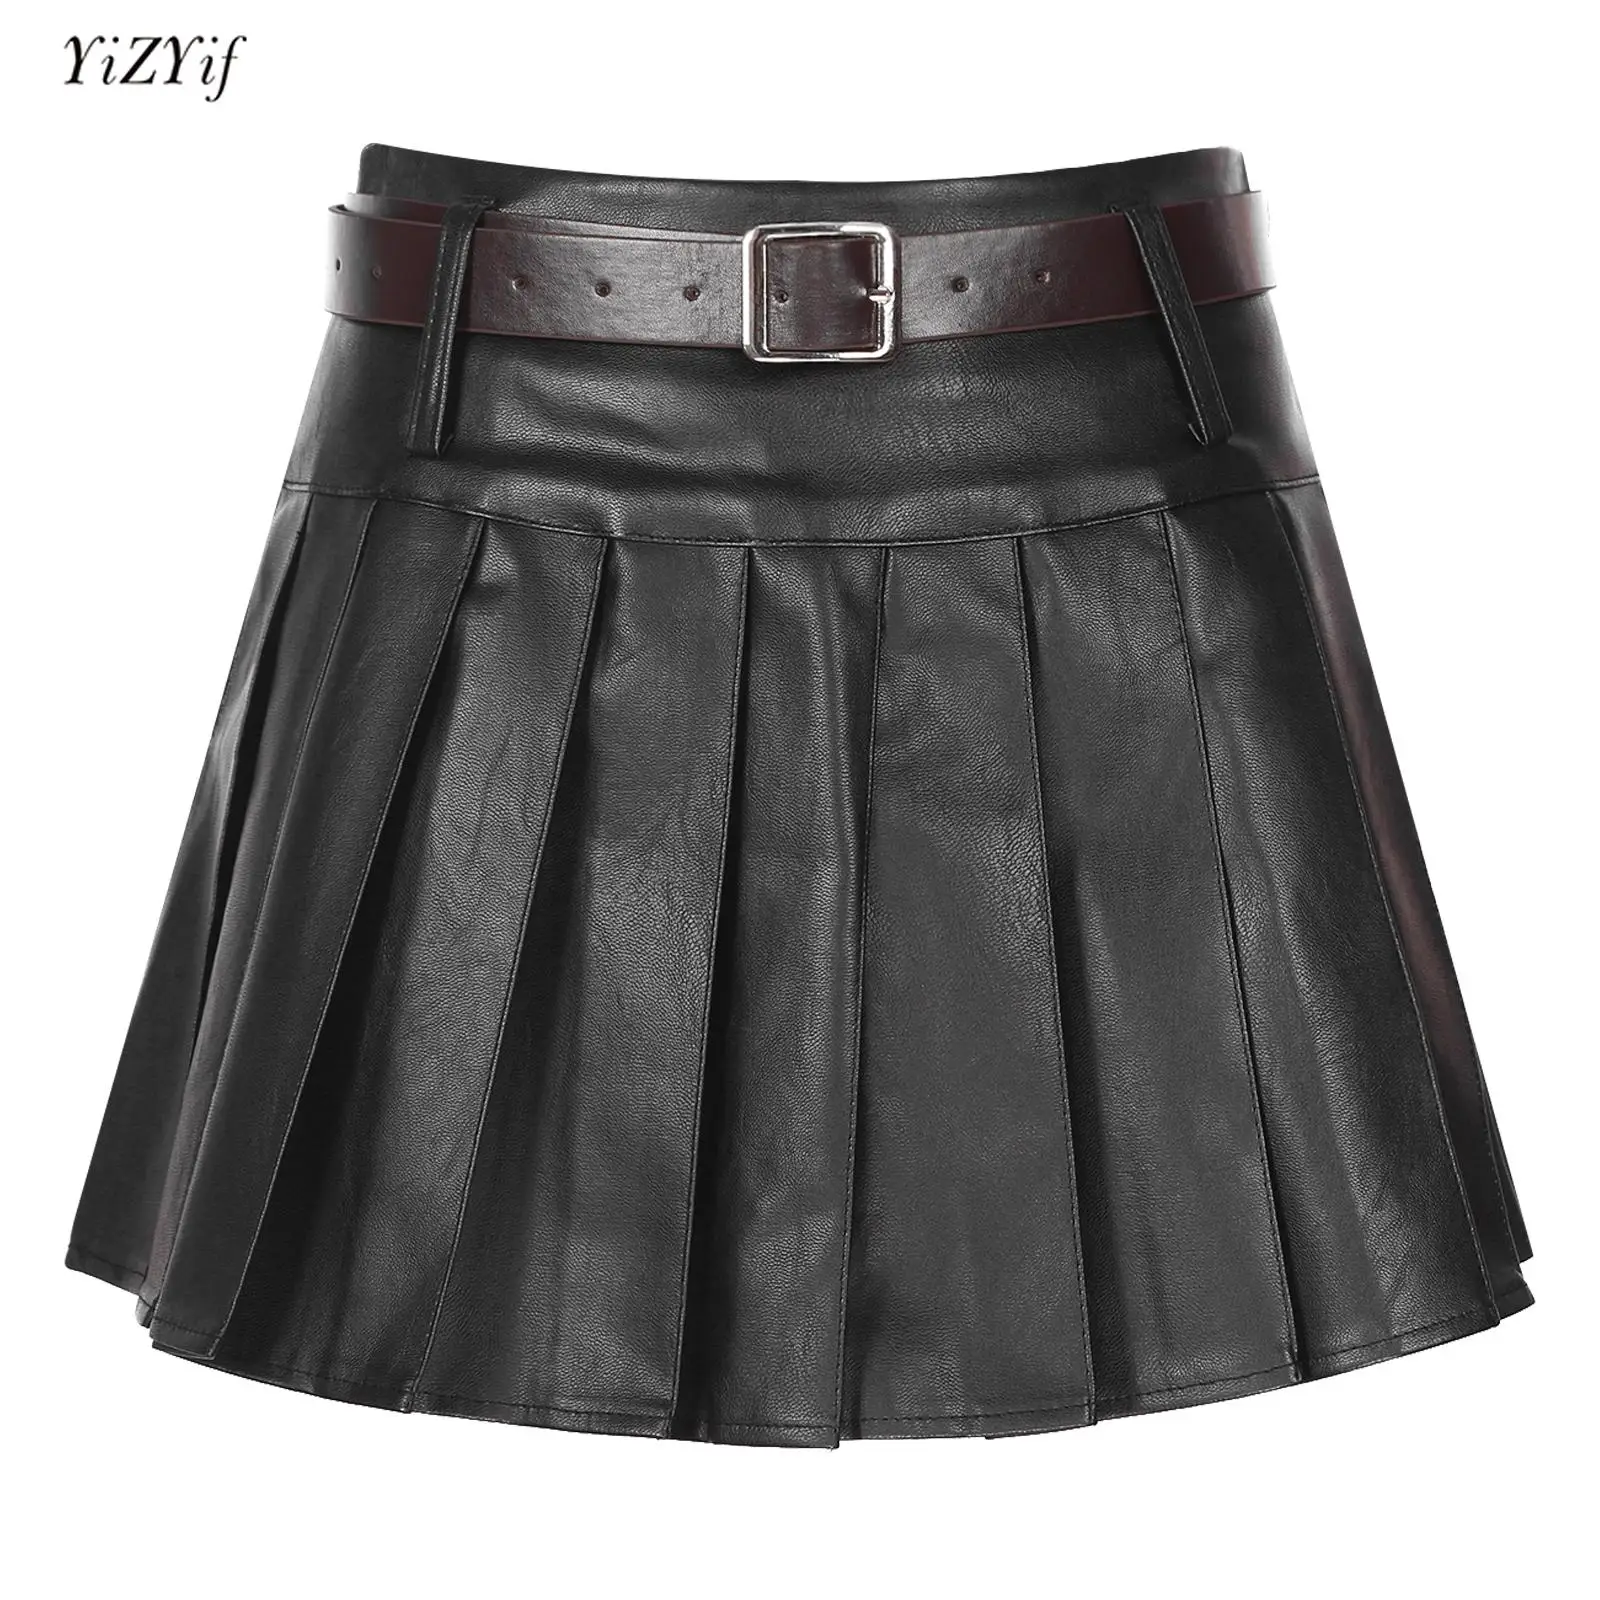 Womens Faux Leather Pleated Skirt Fashion Clubwear High Waist Built-in Shorts Skirts with Adjustable Belt Party Street Dancewear custom design mobile street fast vending carts ice cream food truck van kiosk coffee shop food trailers with fridge for usa